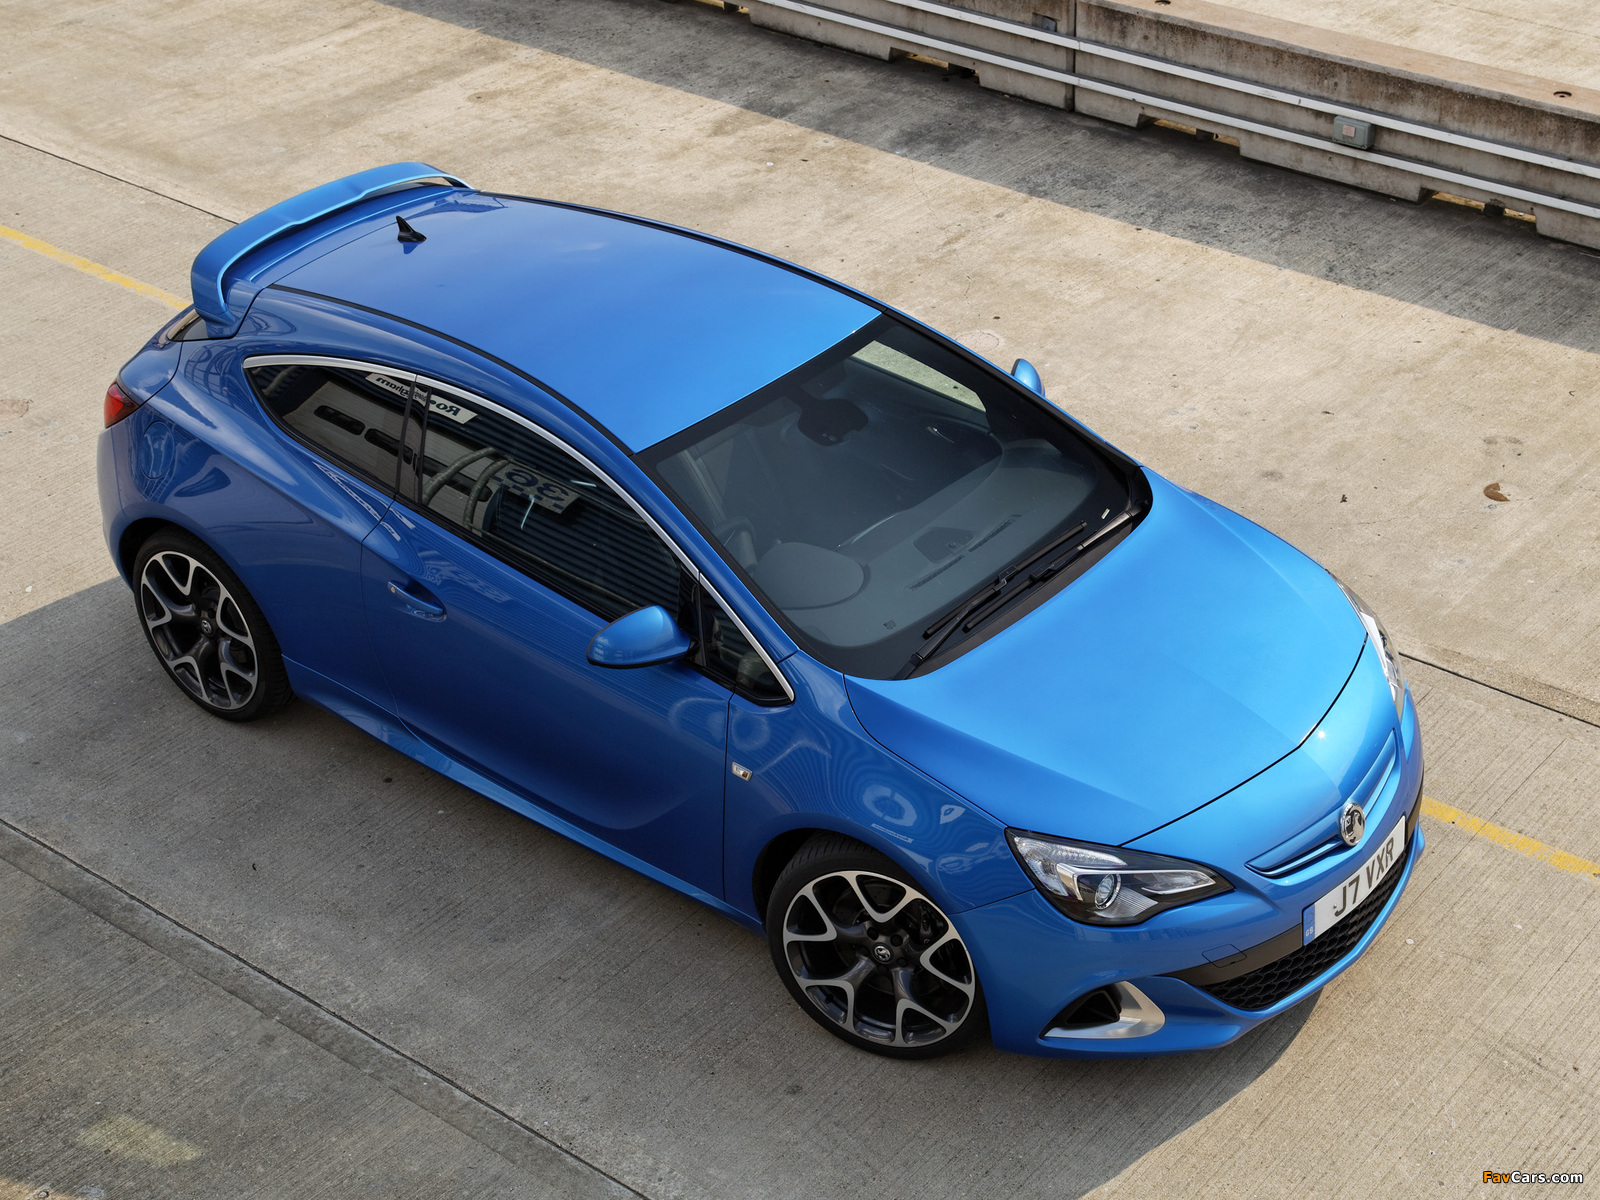 Vauxhall Astra VXR 2012 pictures (1600 x 1200)